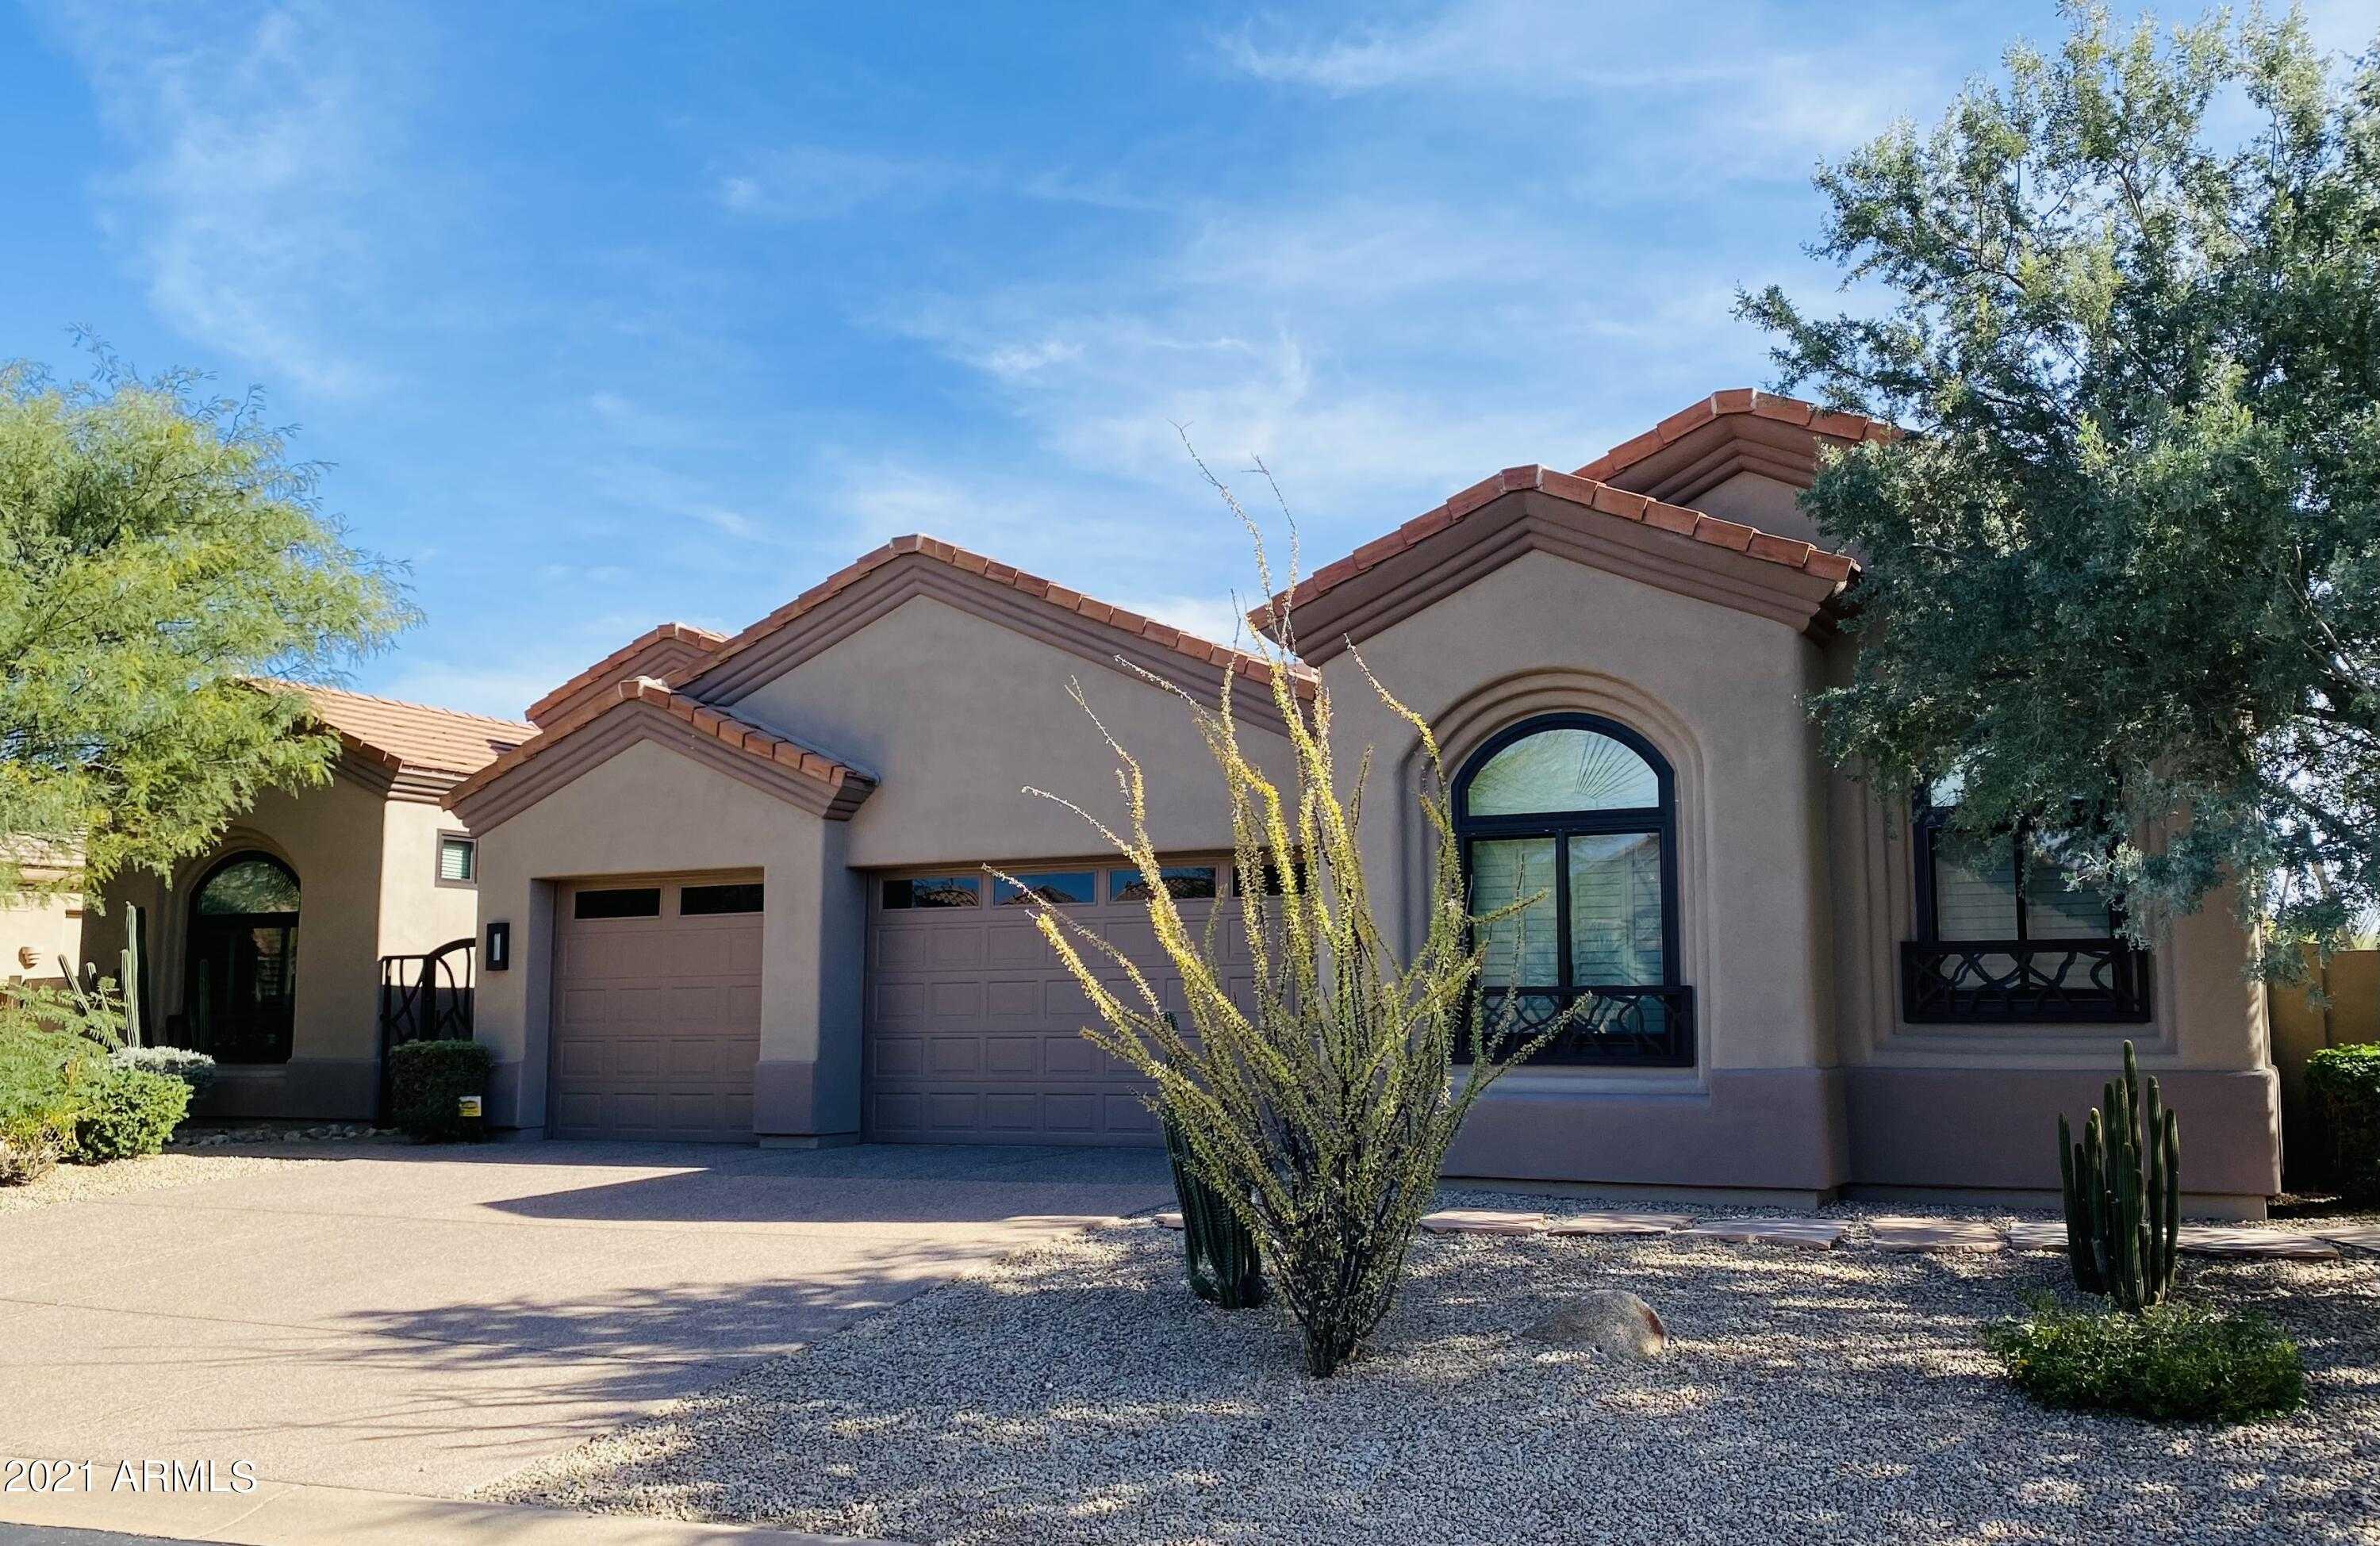 $1,190,000 - 4Br/4Ba - Home for Sale in Legend Trail, Scottsdale